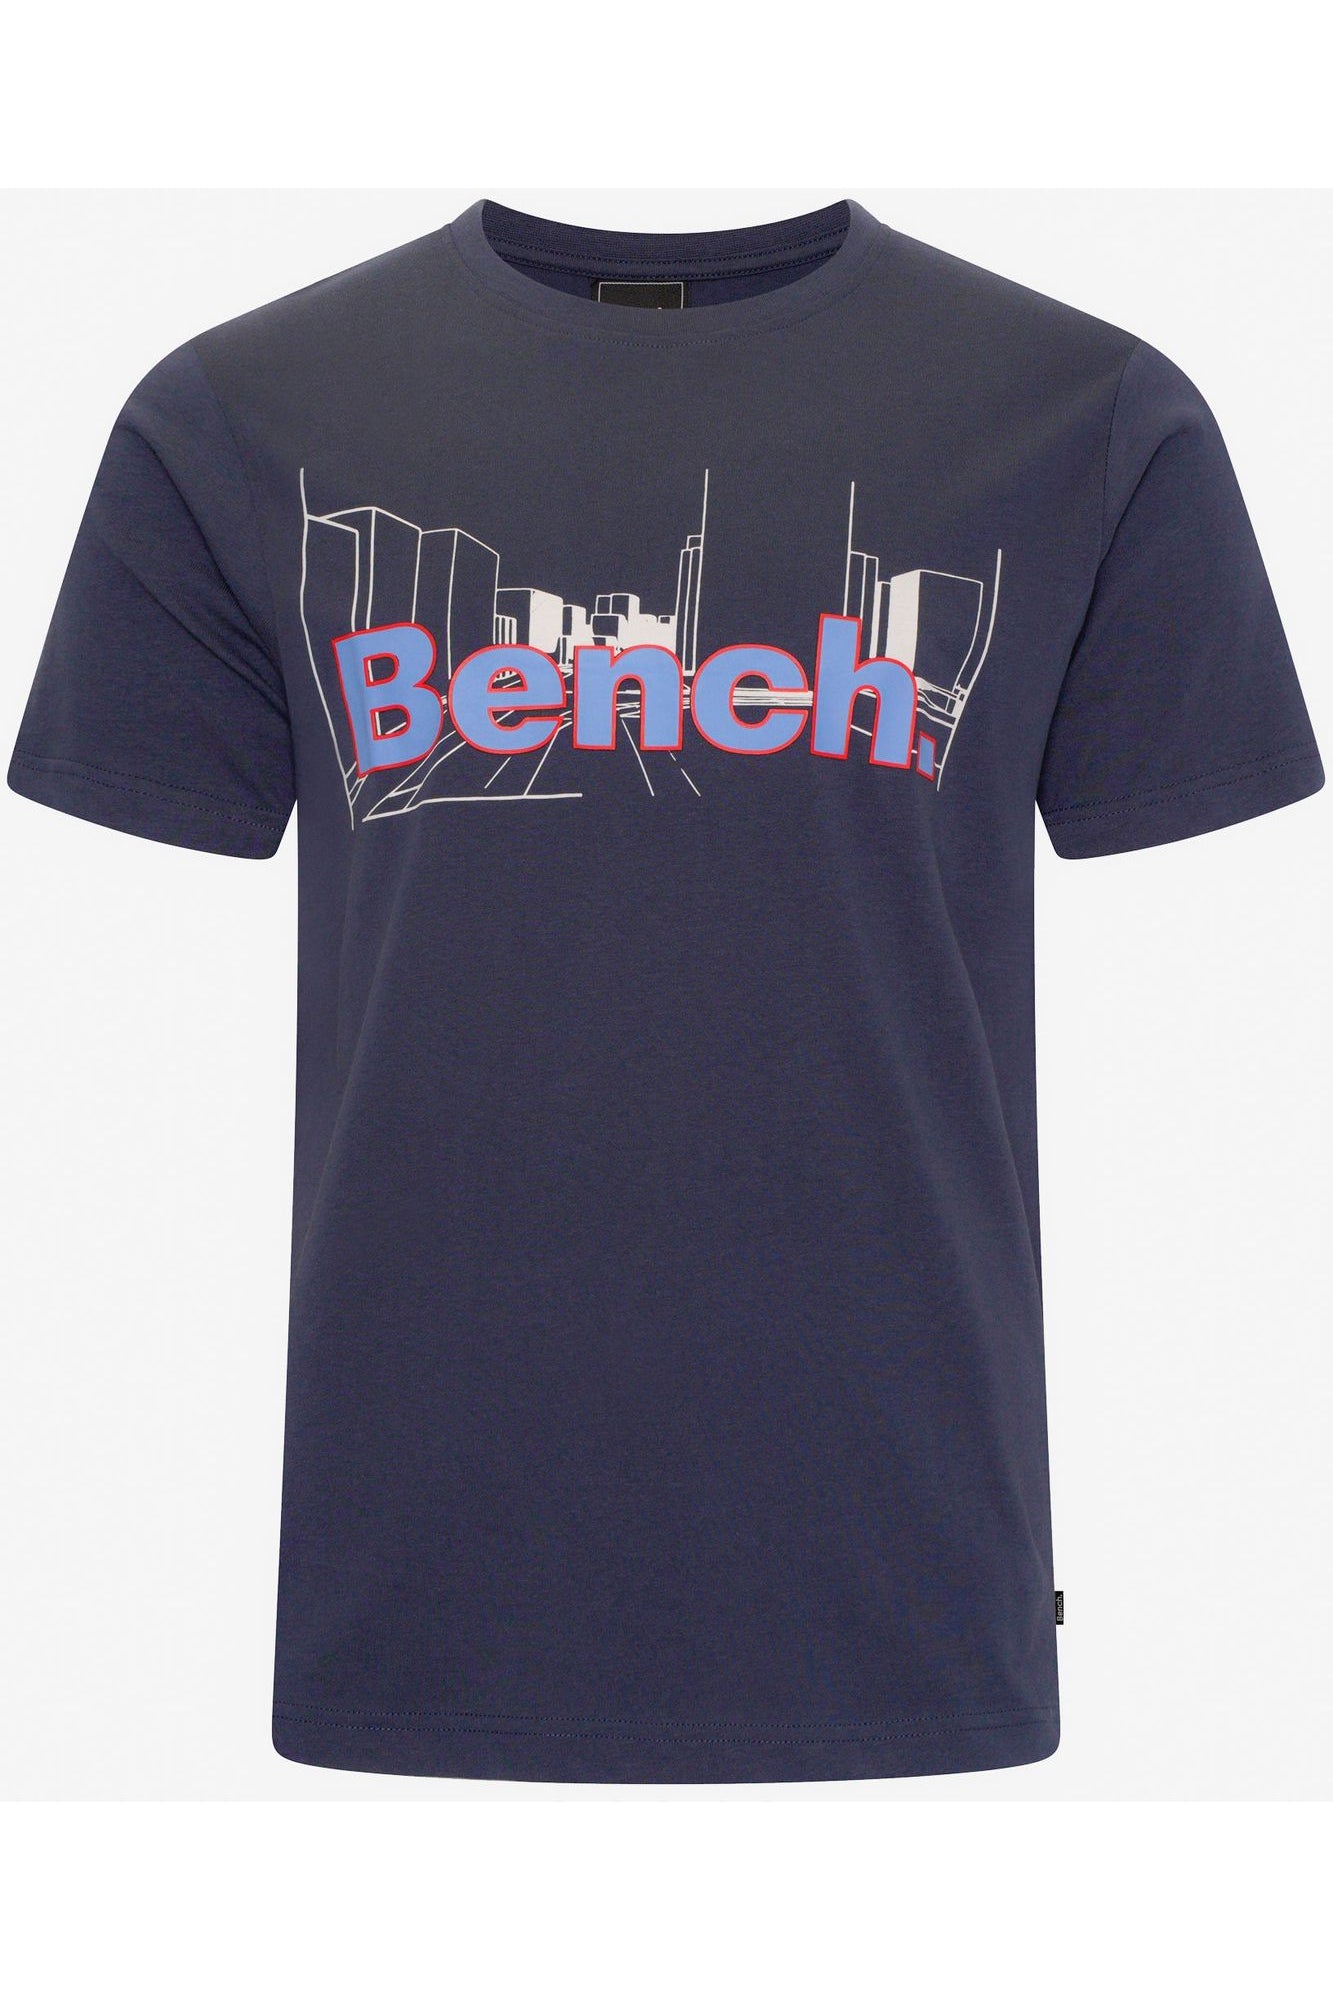 Mens 'LISHMAN' 5 Pack T-Shirts - ASSORTED - Shop at www.Bench.co.uk #LoveMyHood